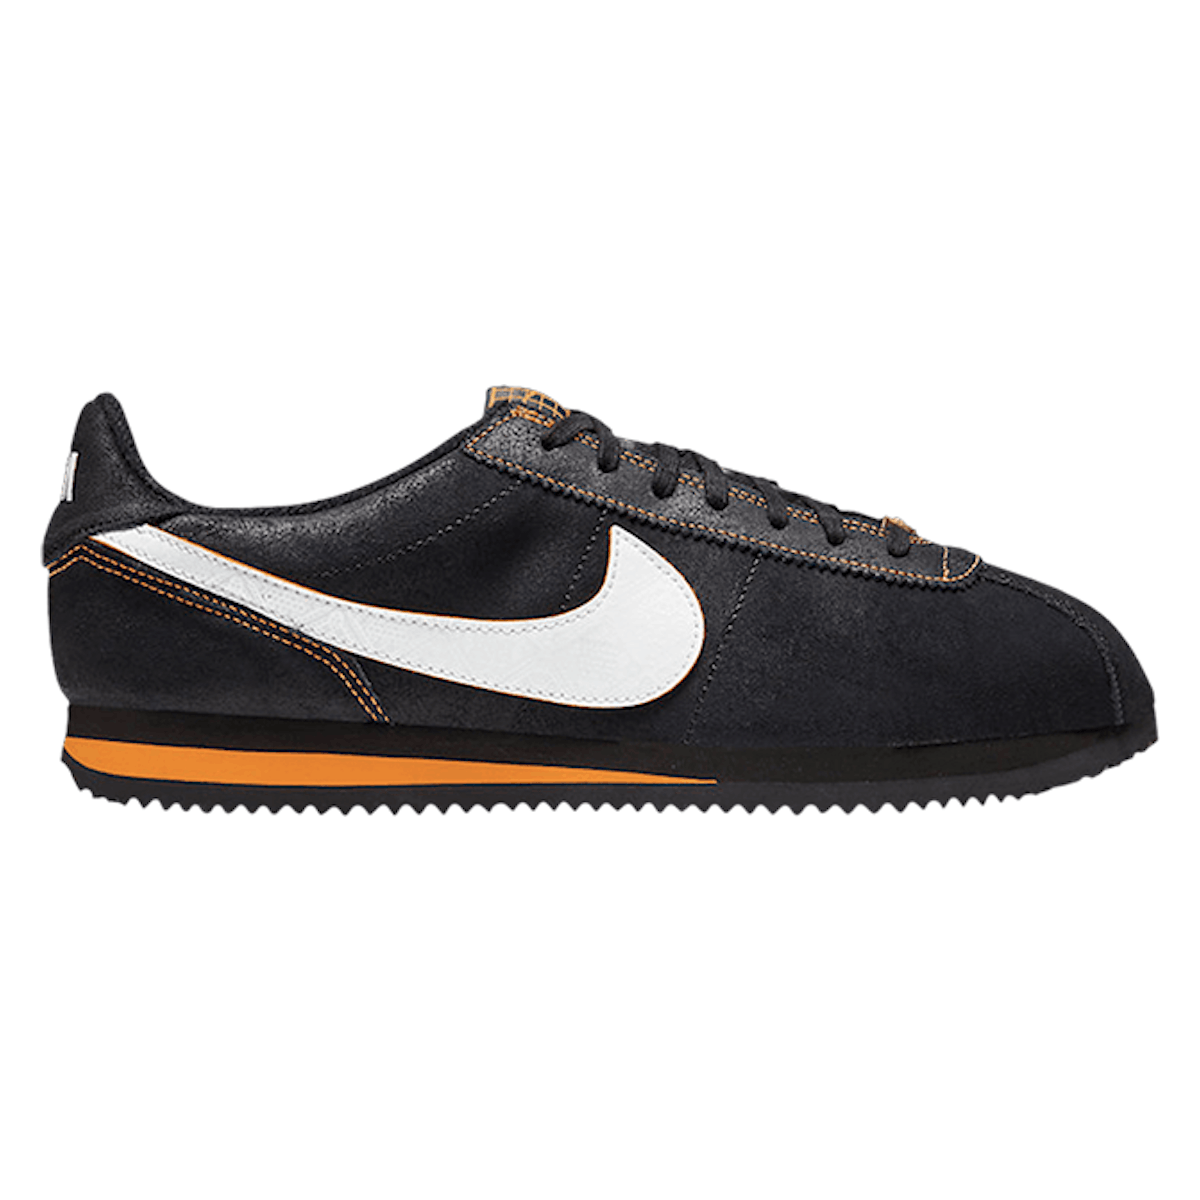 Nike Cortez "Day of the Dead"